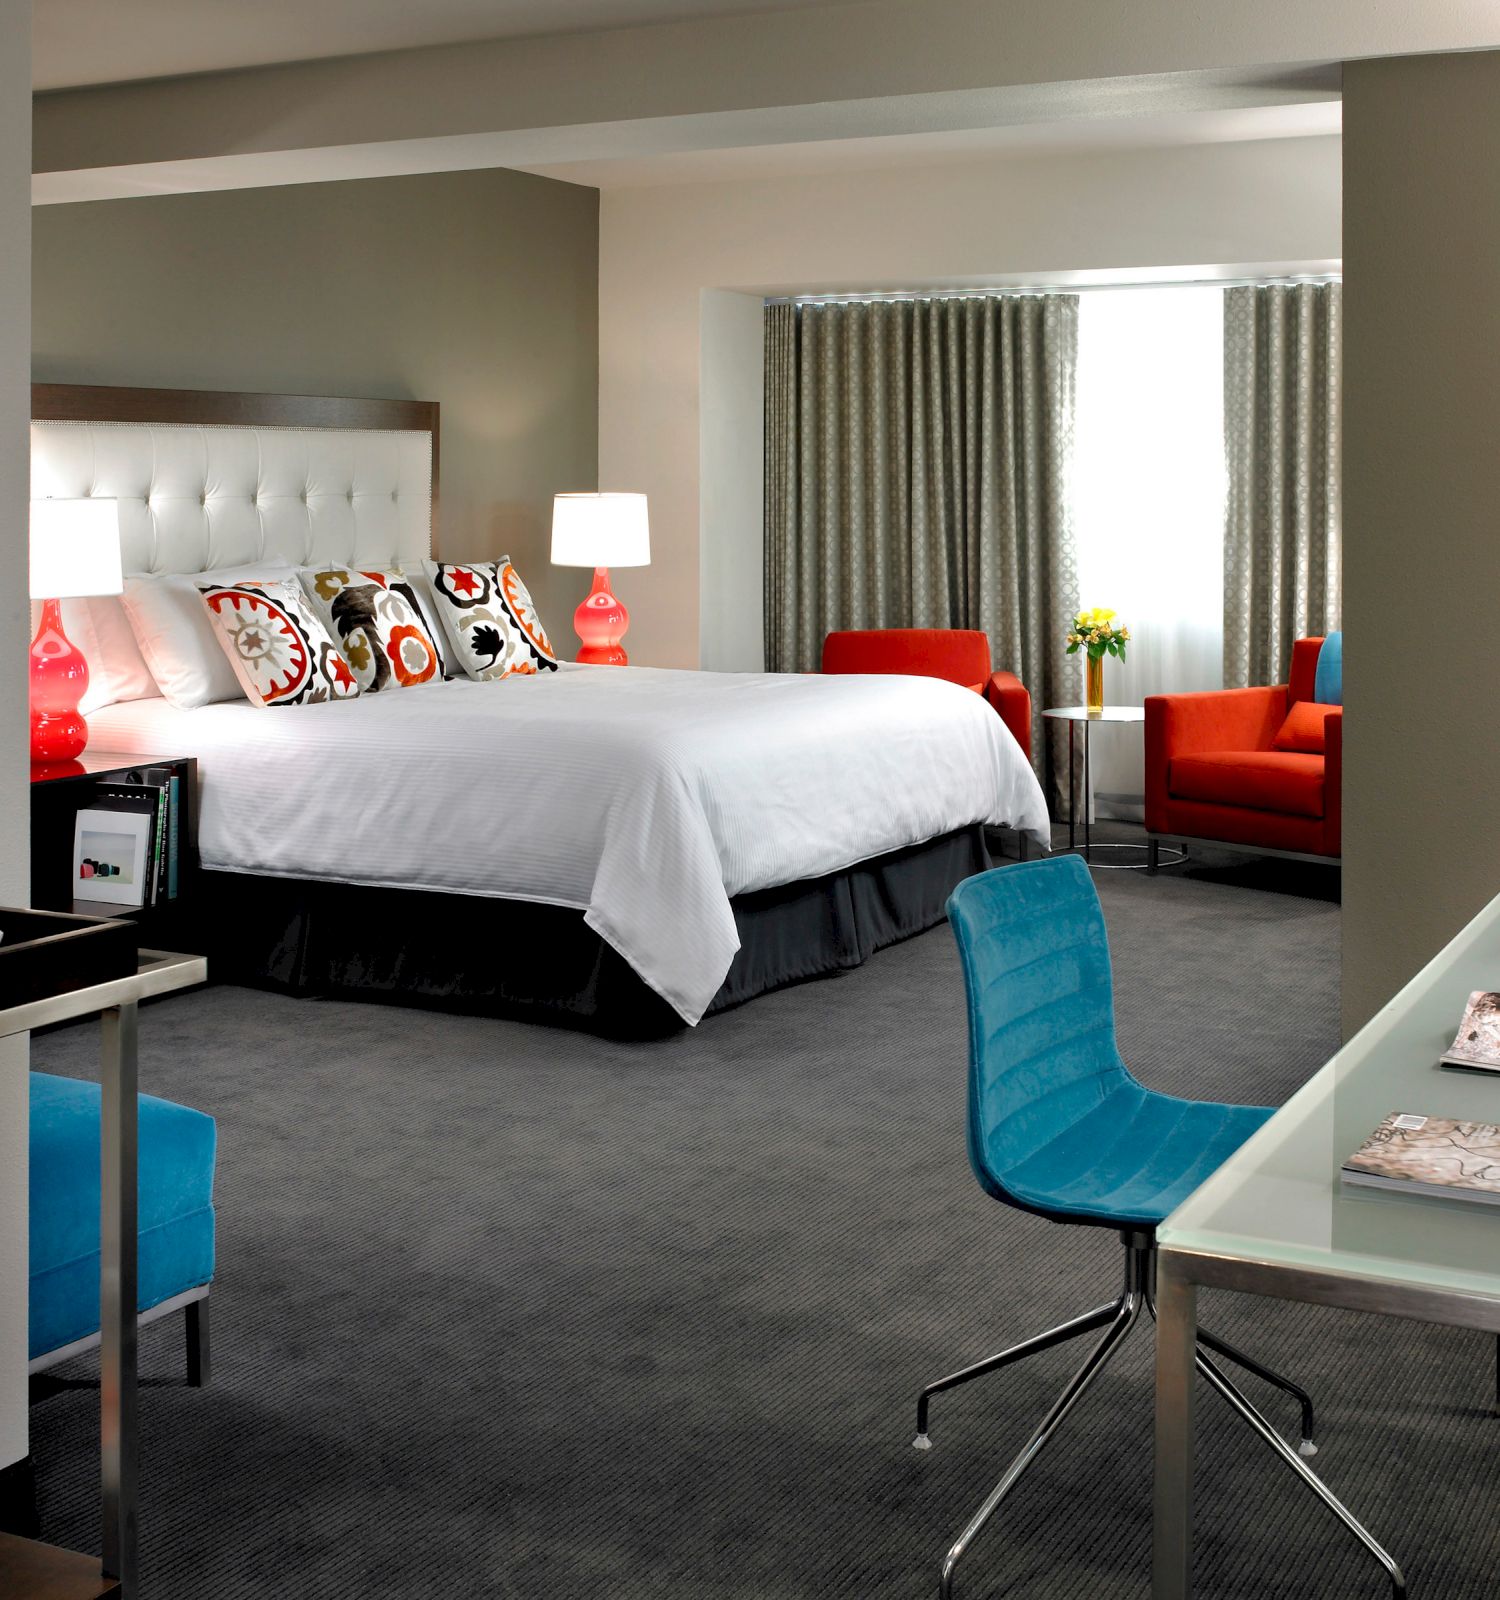 A modern hotel room with a bed, workspace with a blue chair, and seating area. It's well-lit with contemporary decor and amenities.